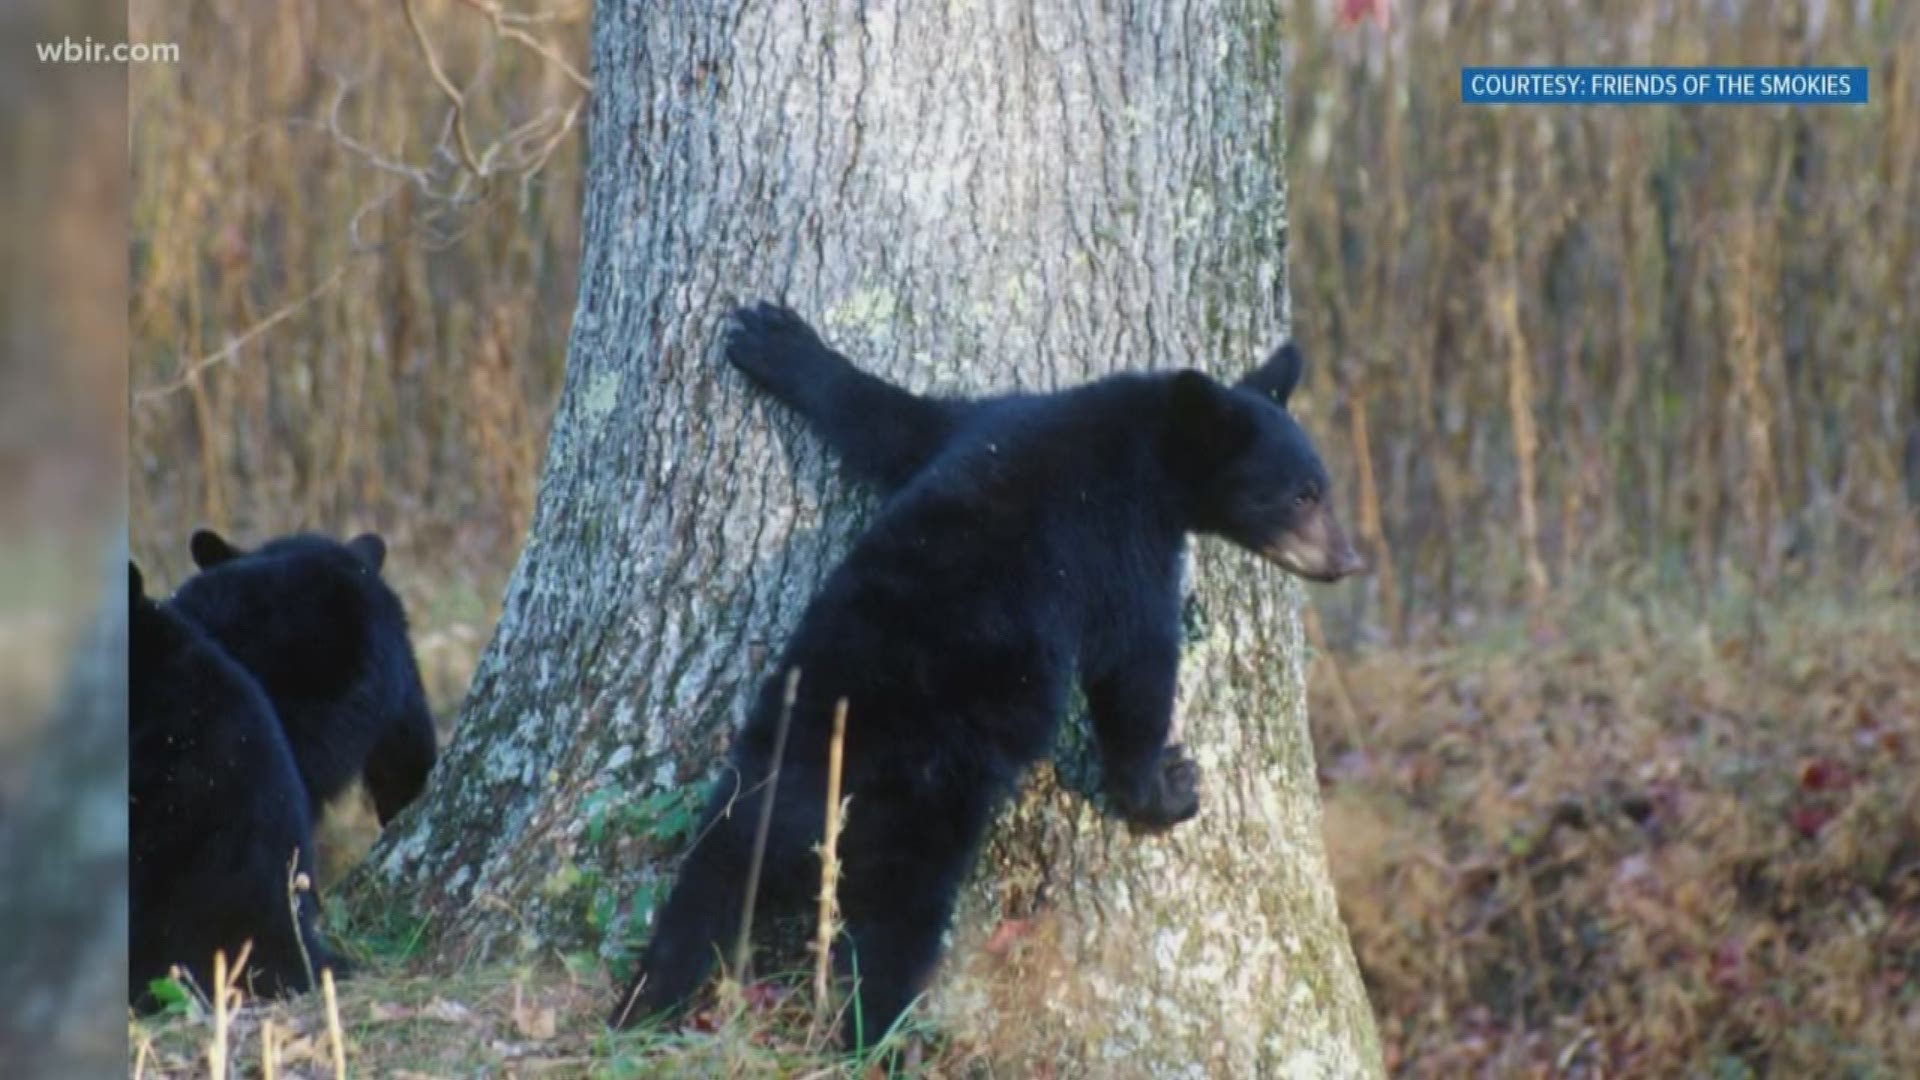 Friends of the Smokies and Appalachian Trail Conservance teamed up to get grant for bears safety, friendsofthesmokies.org. Oct. 30, 2019-4pm.